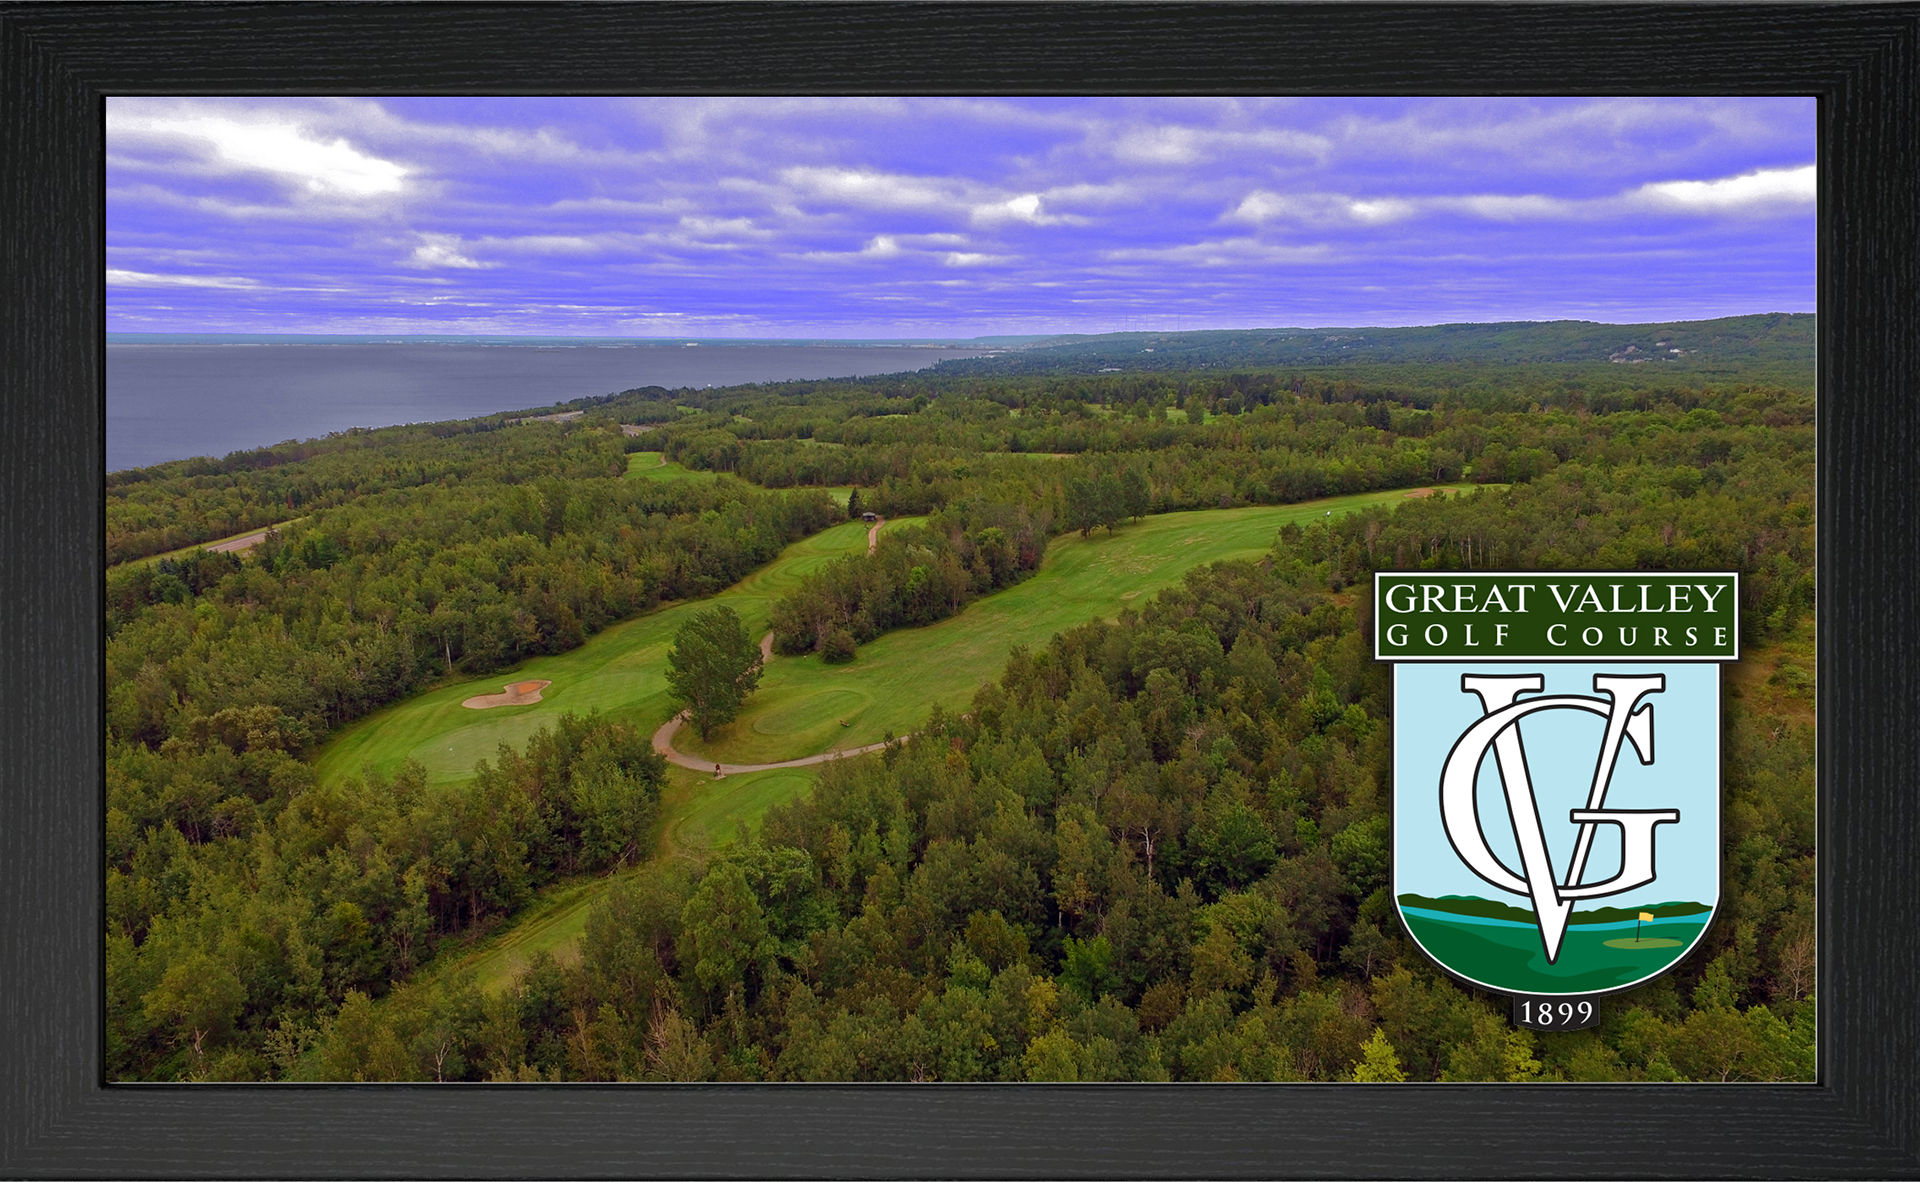 display image of golf course with logo overlay